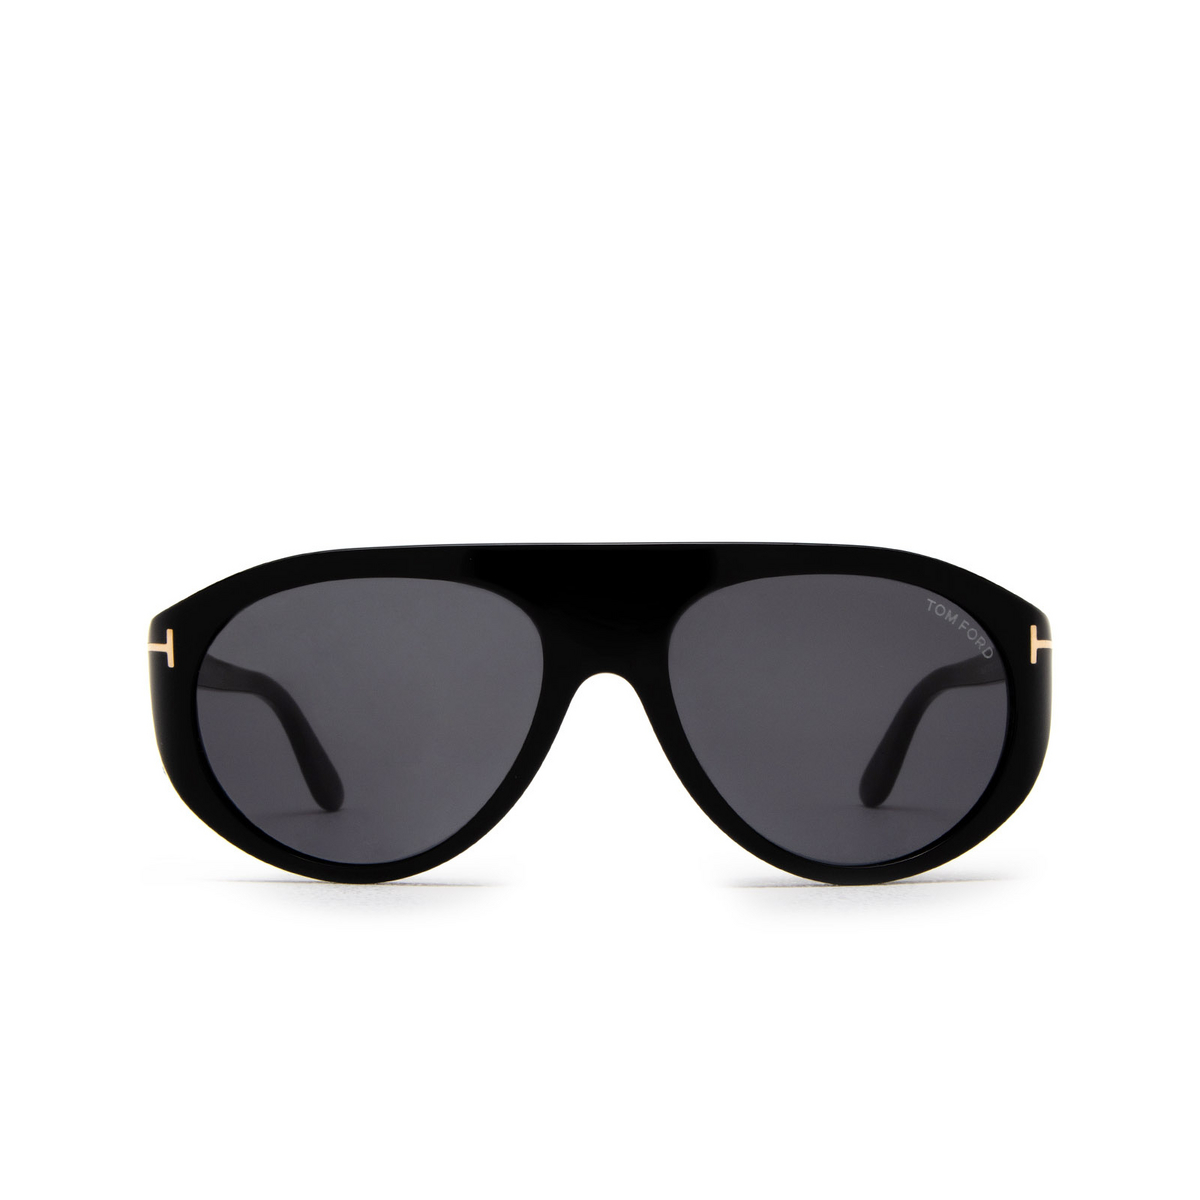 Tom Ford REX-02 Sunglasses 01A Shiny Black - front view